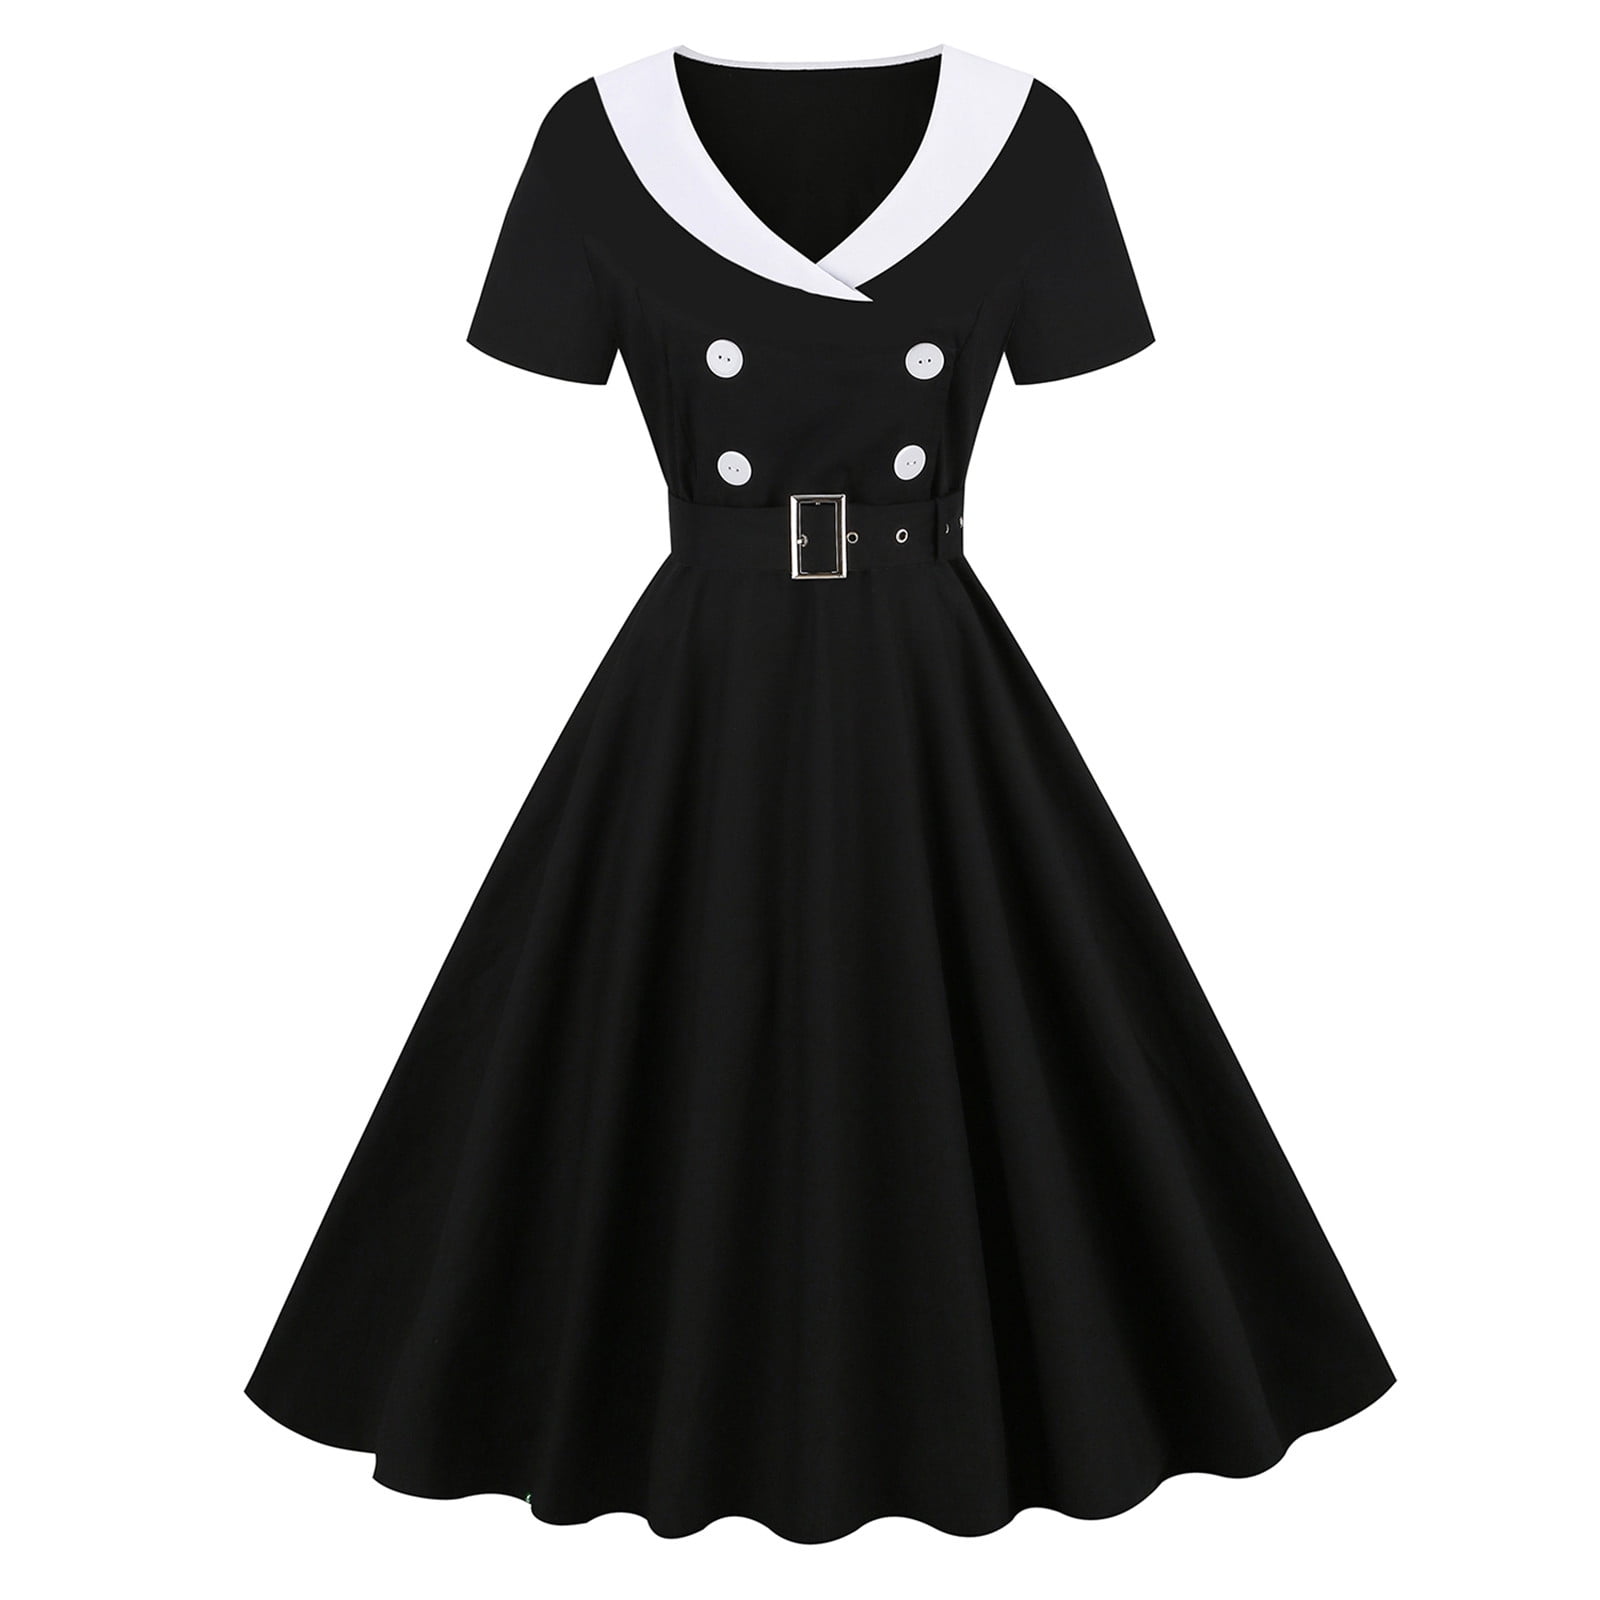 Women's Vintage Short Sleeve Dress Style 1950s Retro Rockabilly Belted  Cocktail Swing Tea Party Dresses 